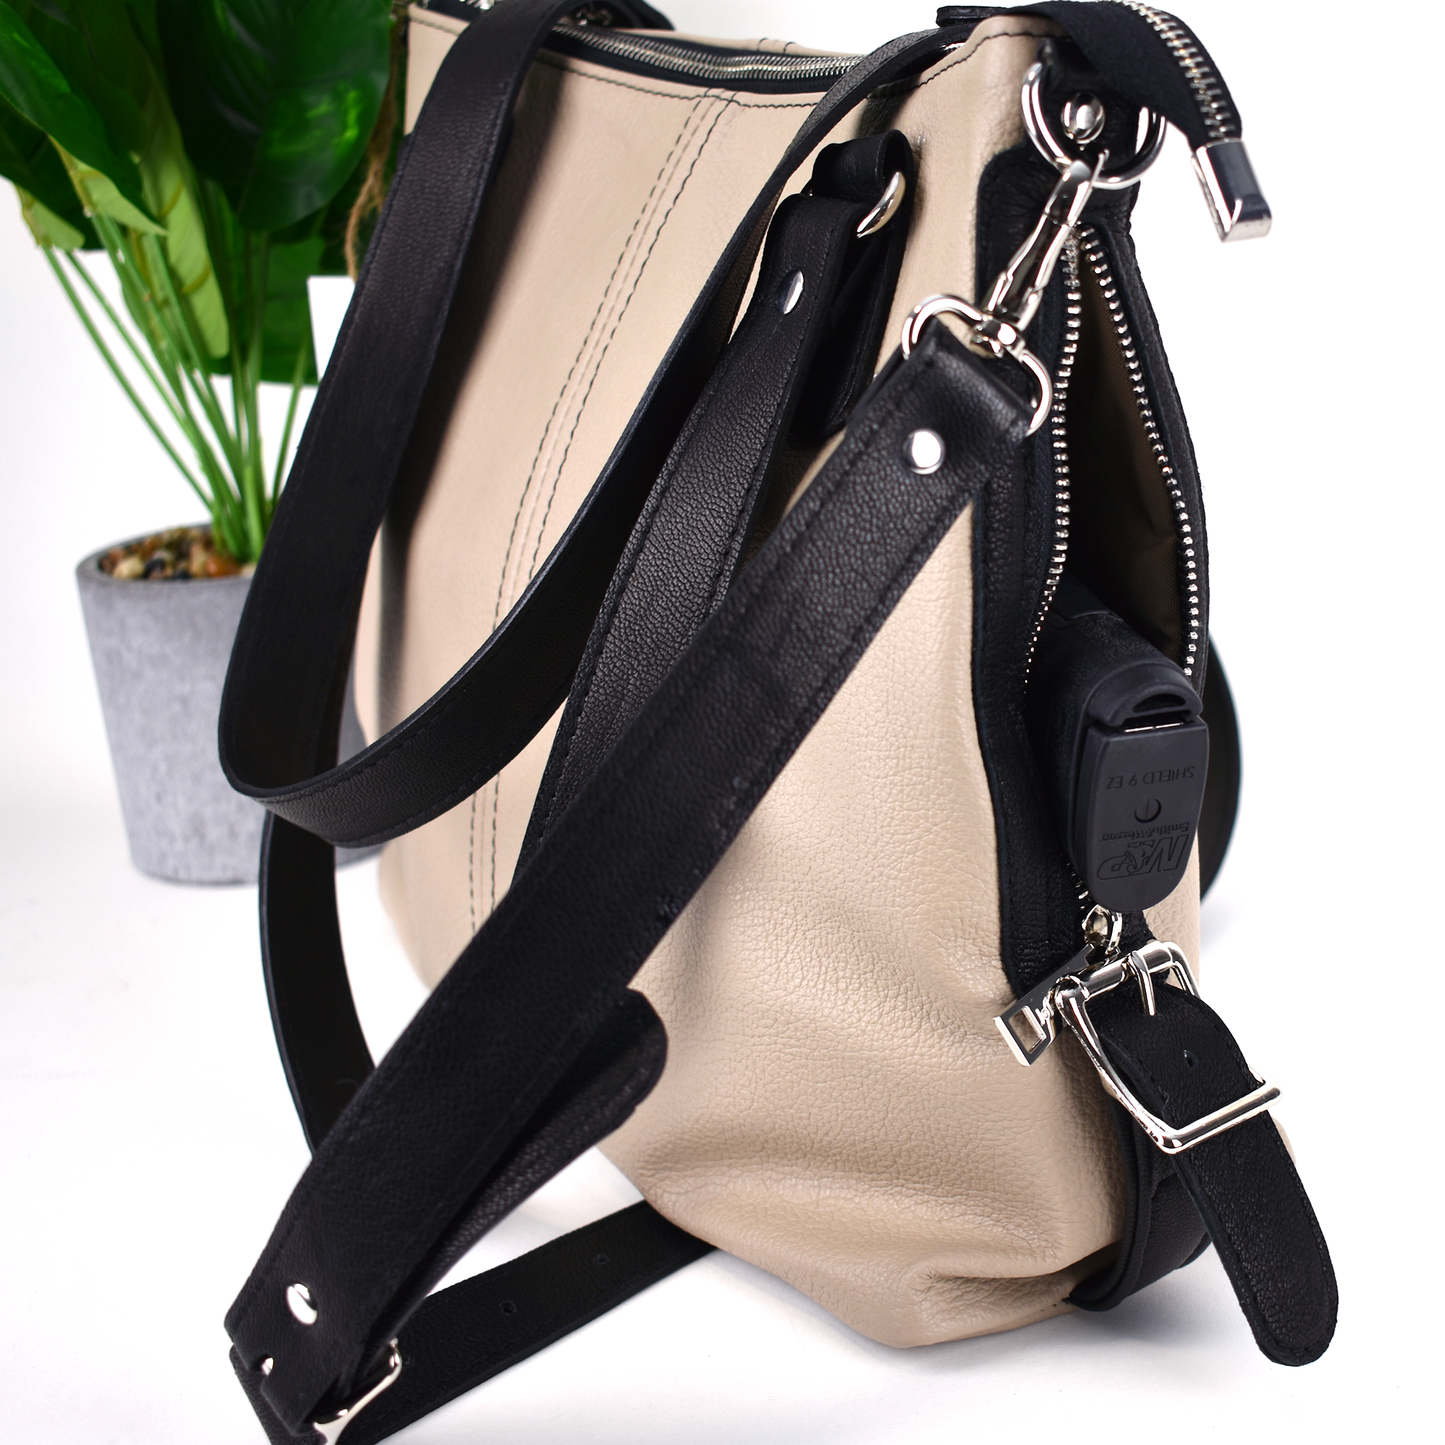 The Juliet Beige and Black Hobo Style Conceal Carry Purse